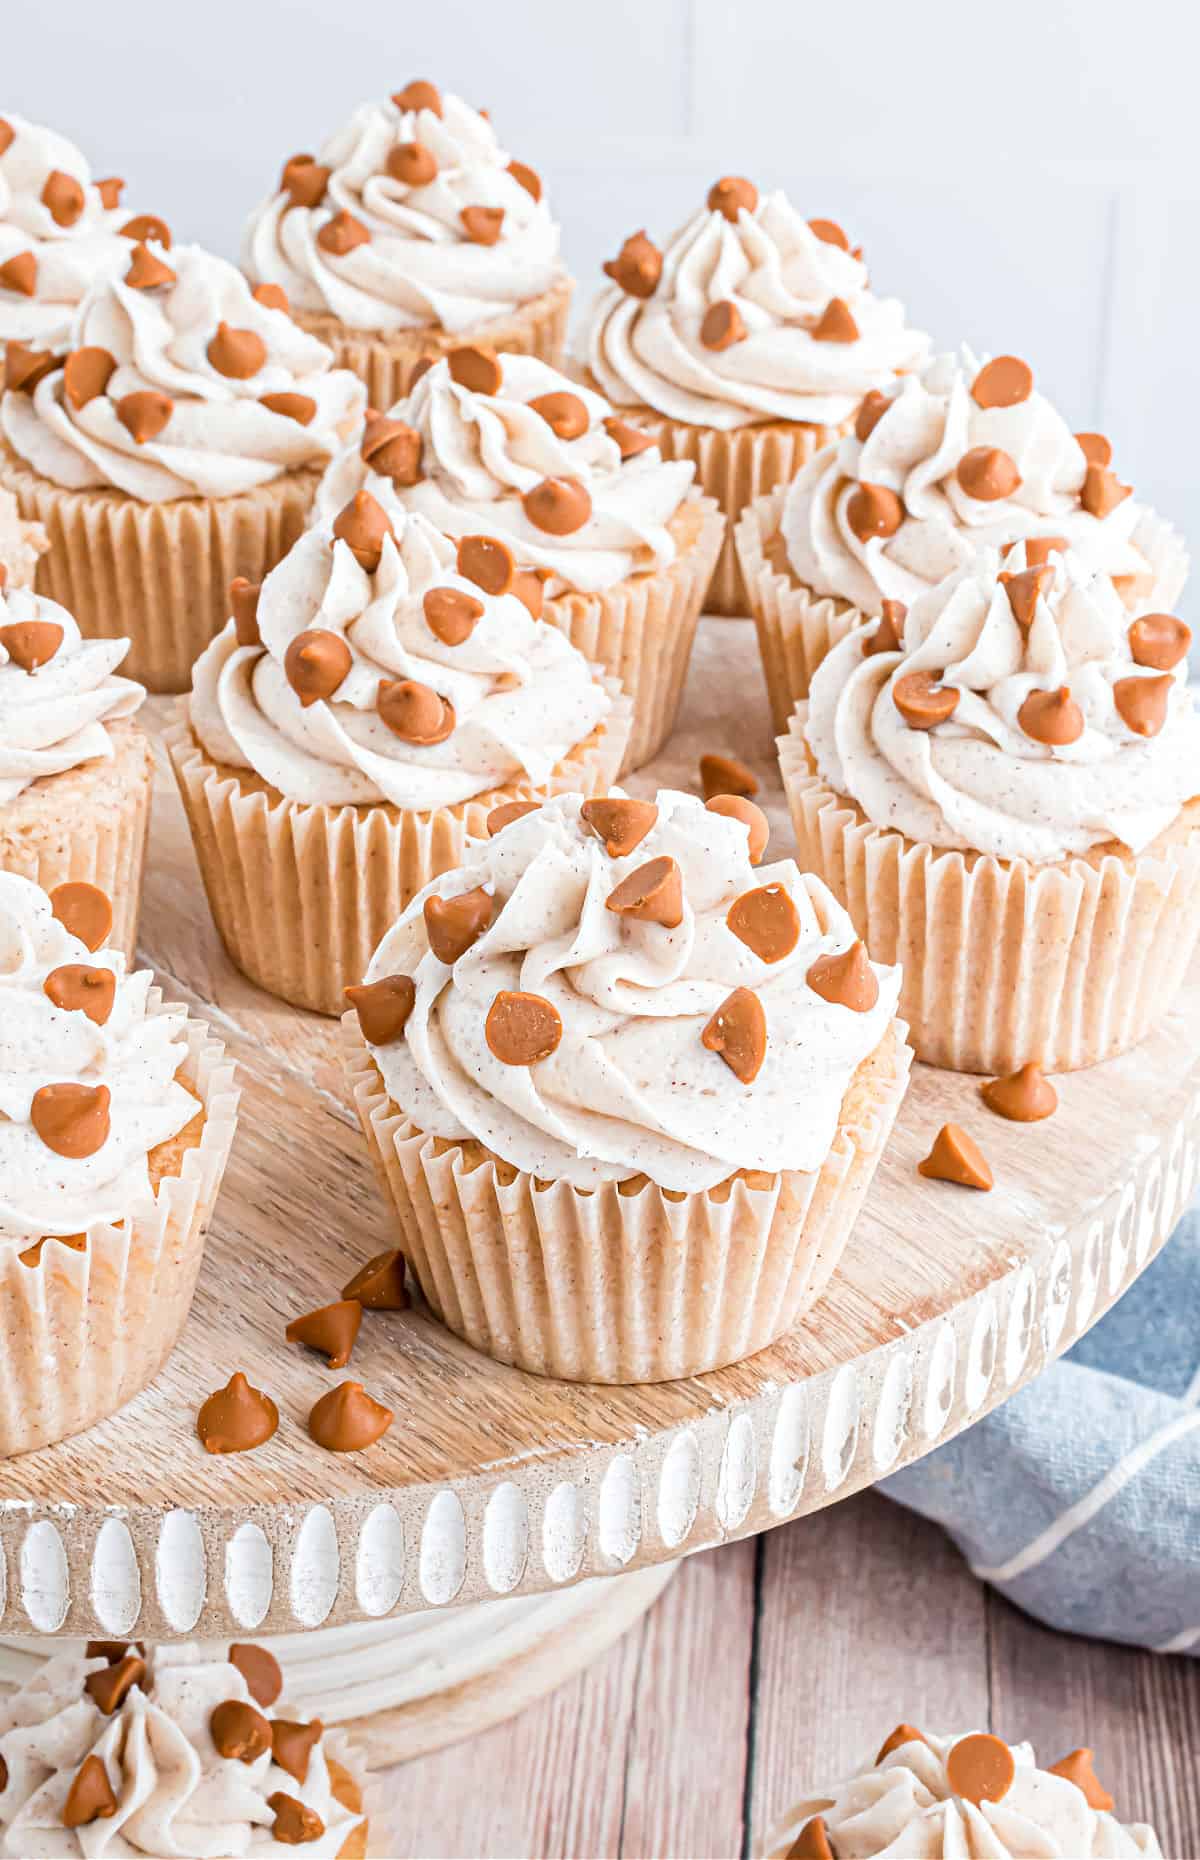 Cake platter with spice cupcakes topped with cinnamon frosting.